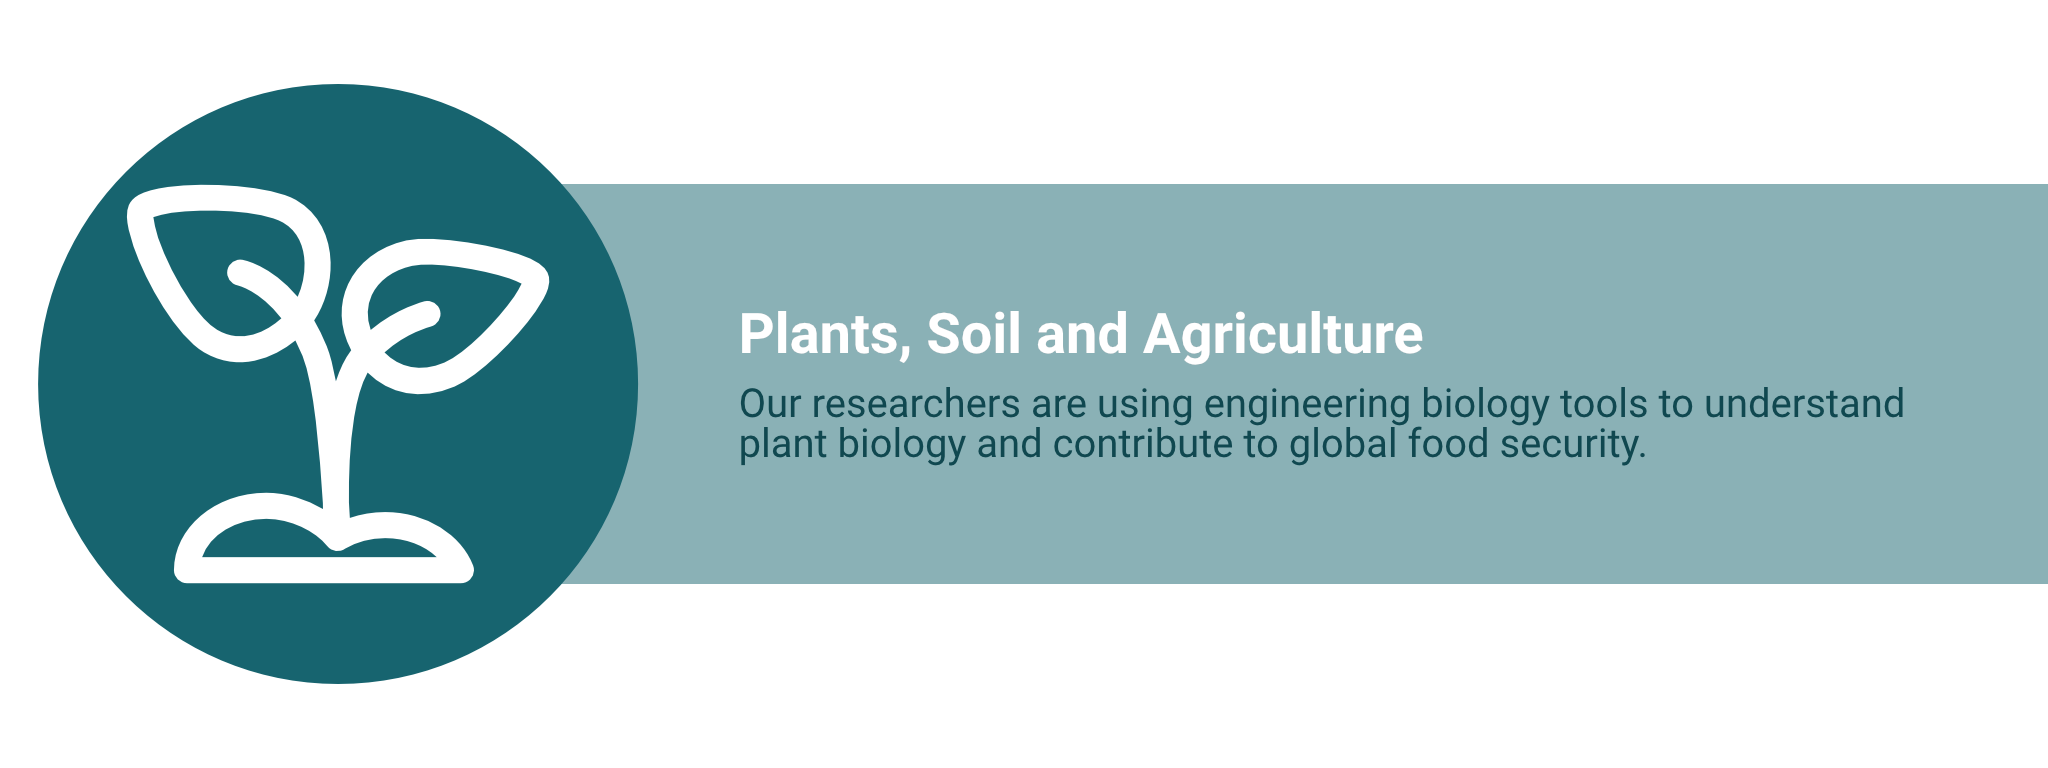 On the left, a white icon on a dark teal background shows a plant growing out of soil. On the right, “Plants, Soil and Agriculture. Our researchers are using engineering biology tools to understand plant biology and contribute to global food security."